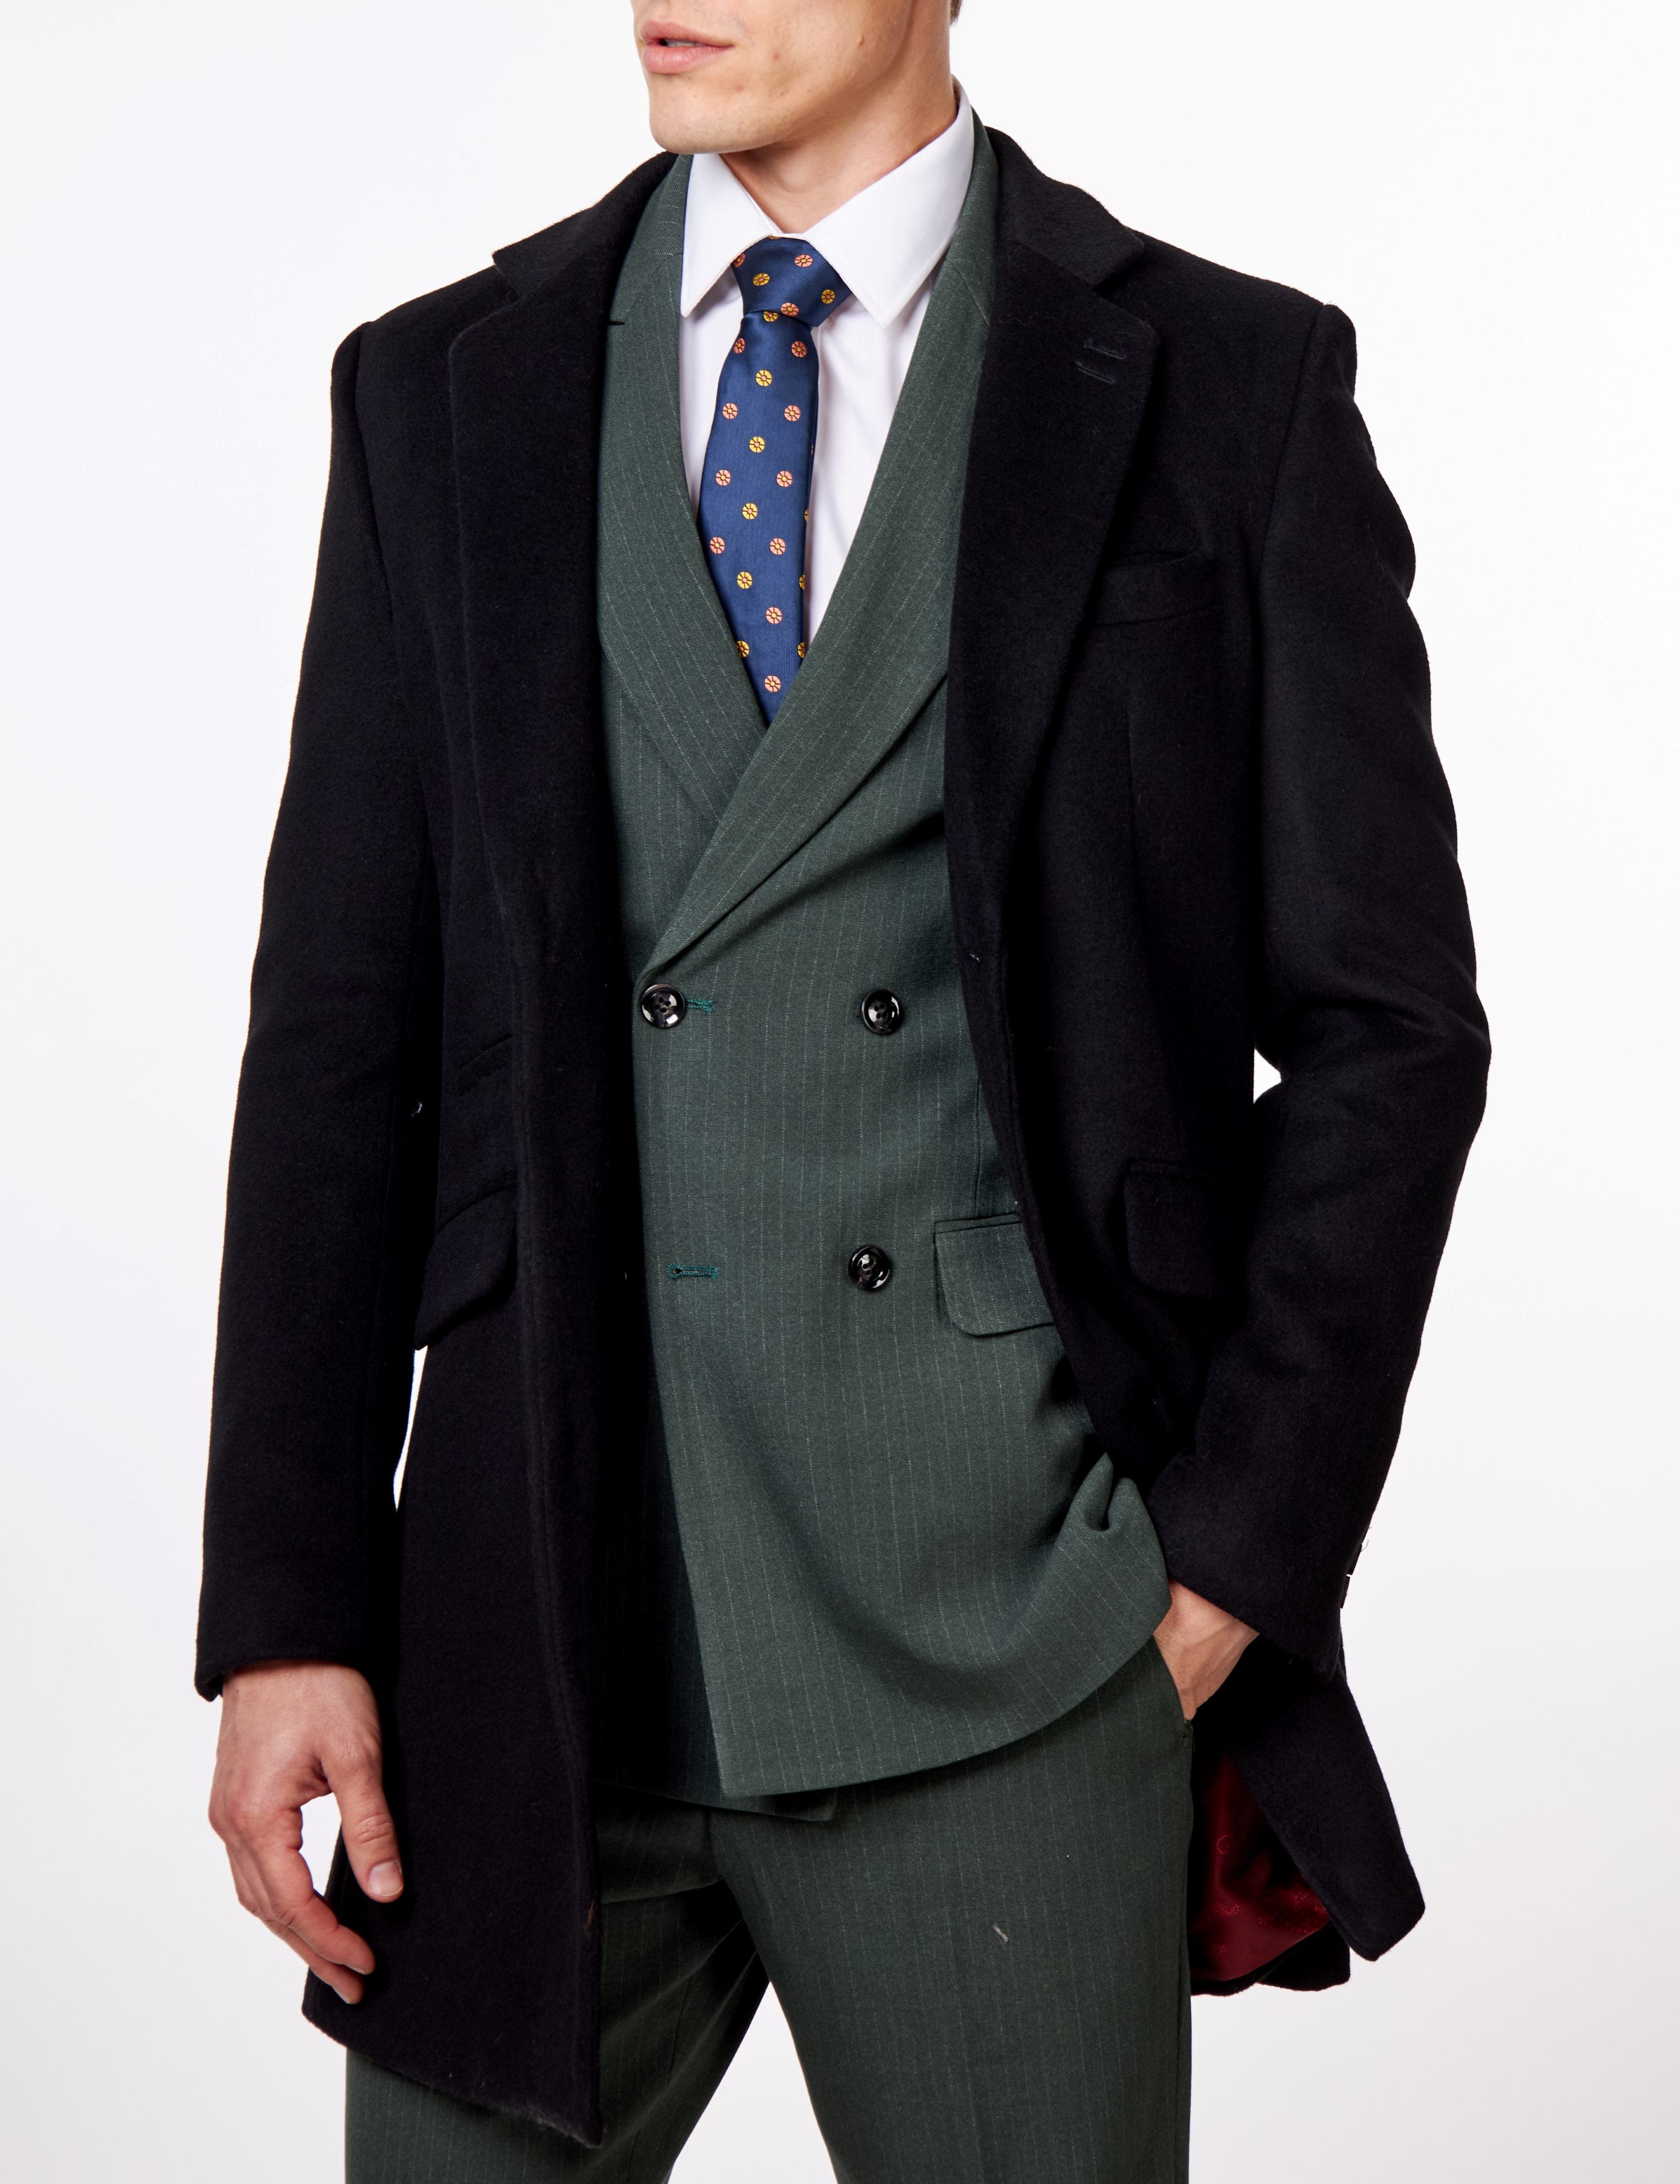 WILLIAM – GREEN DOUBLE BREASTED PINSTRIPE  JACKET